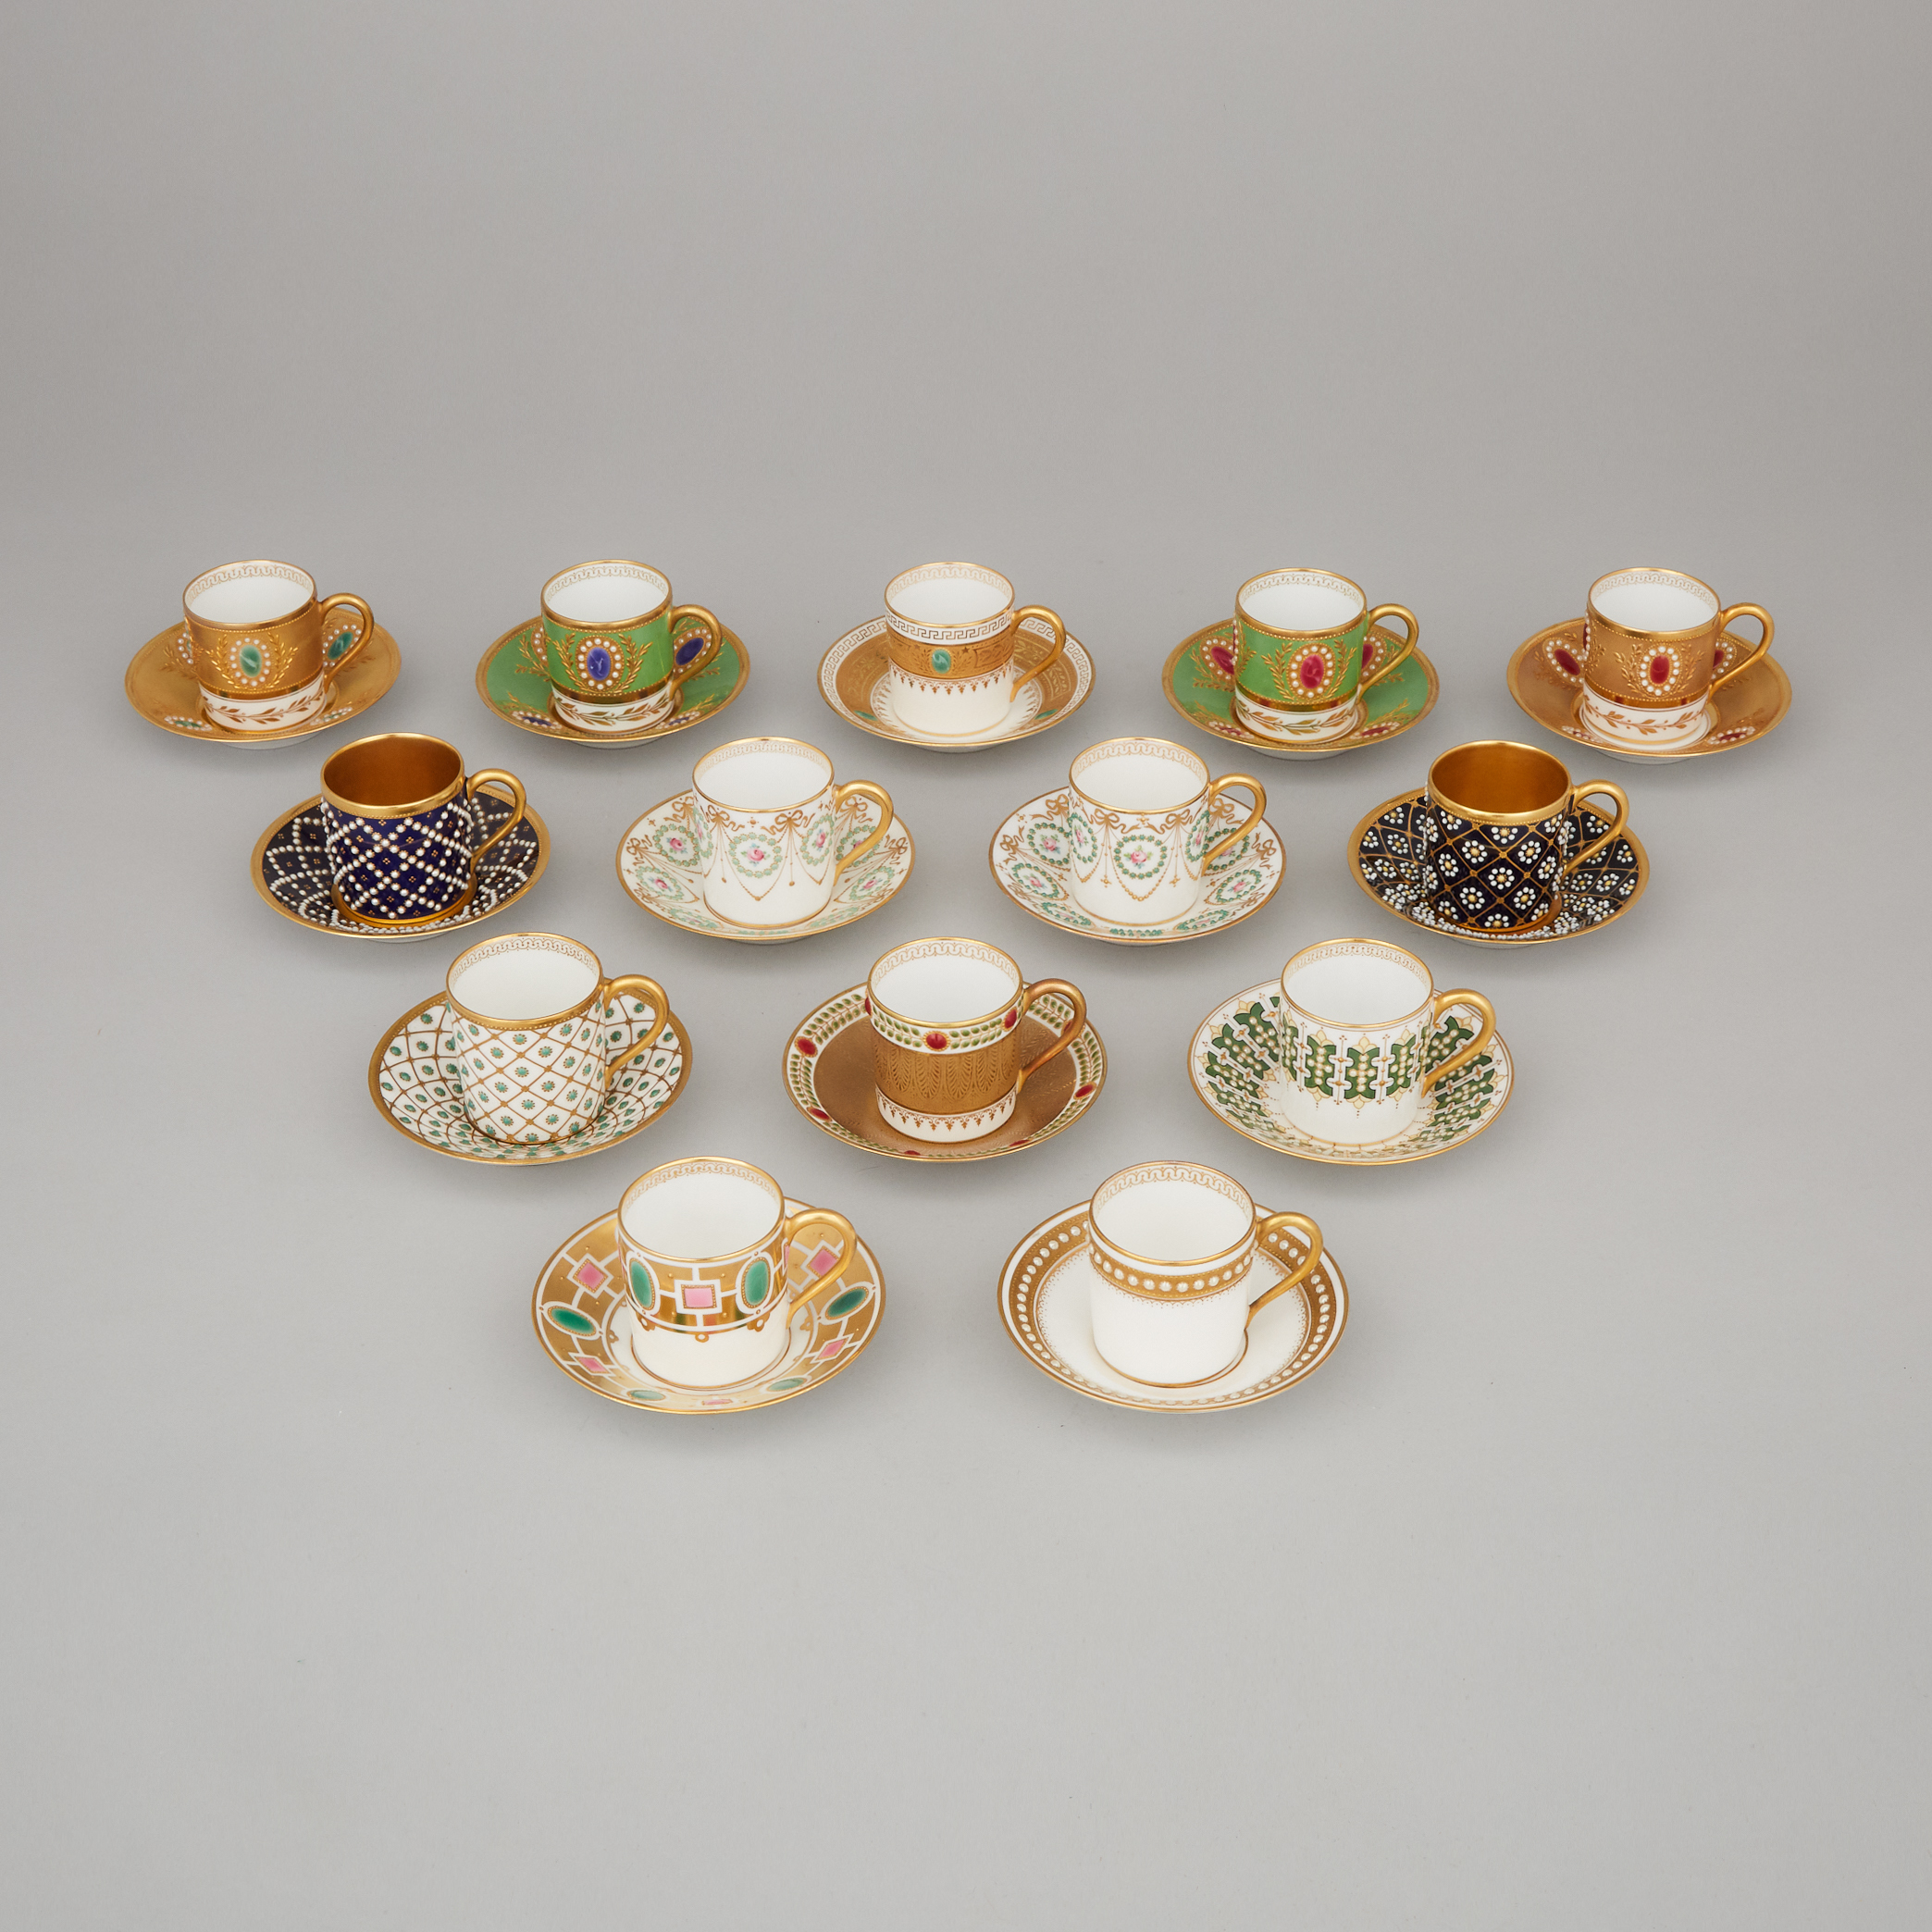 Set of Fourteen Raynaud Limoges 'Jeweled' Demi-Tasse Cups and Saucers, early 20th century